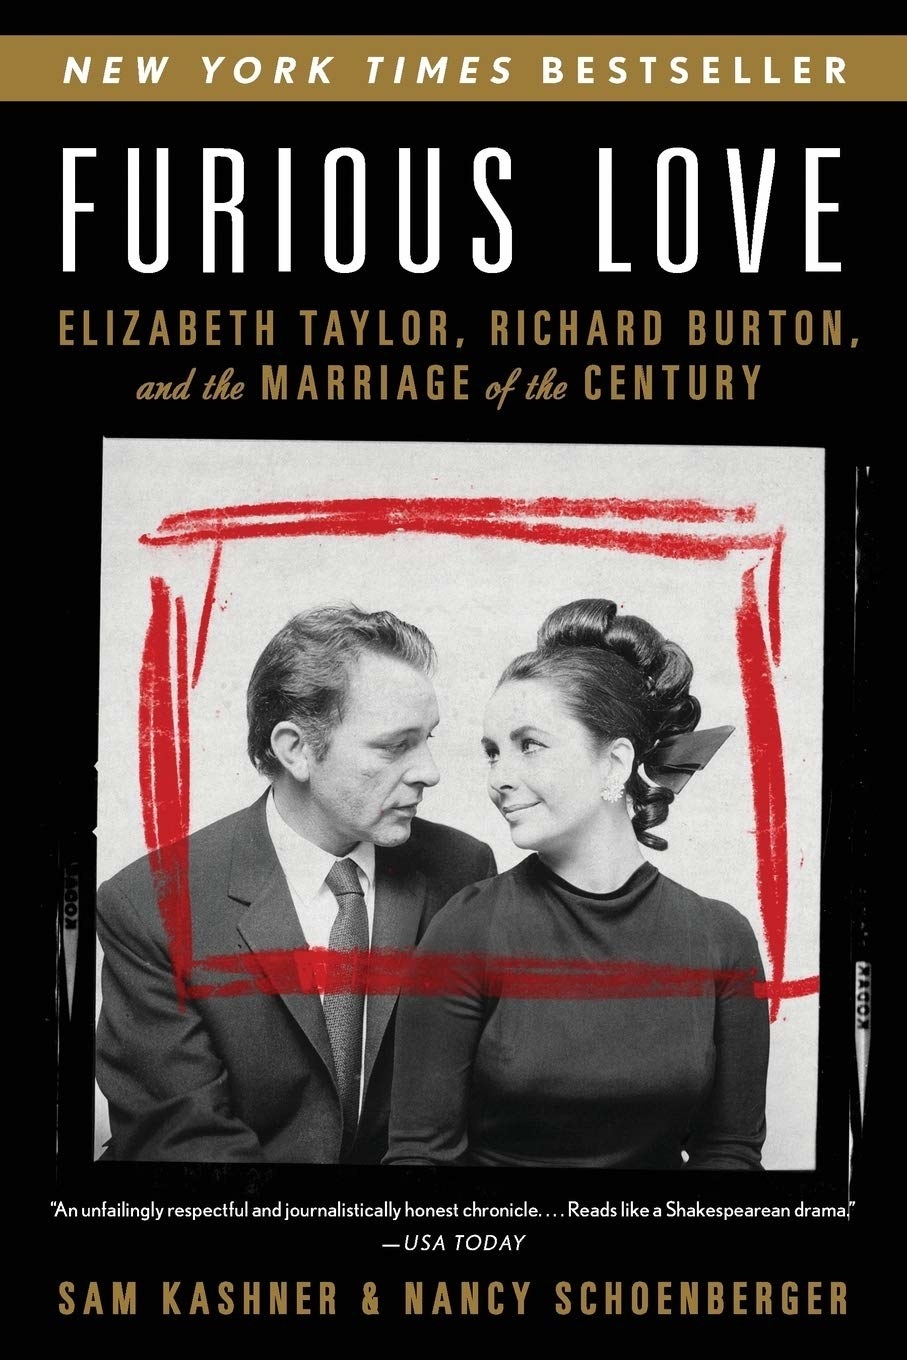 Cover of the book with Elizabeth Taylor and Richard Burton 